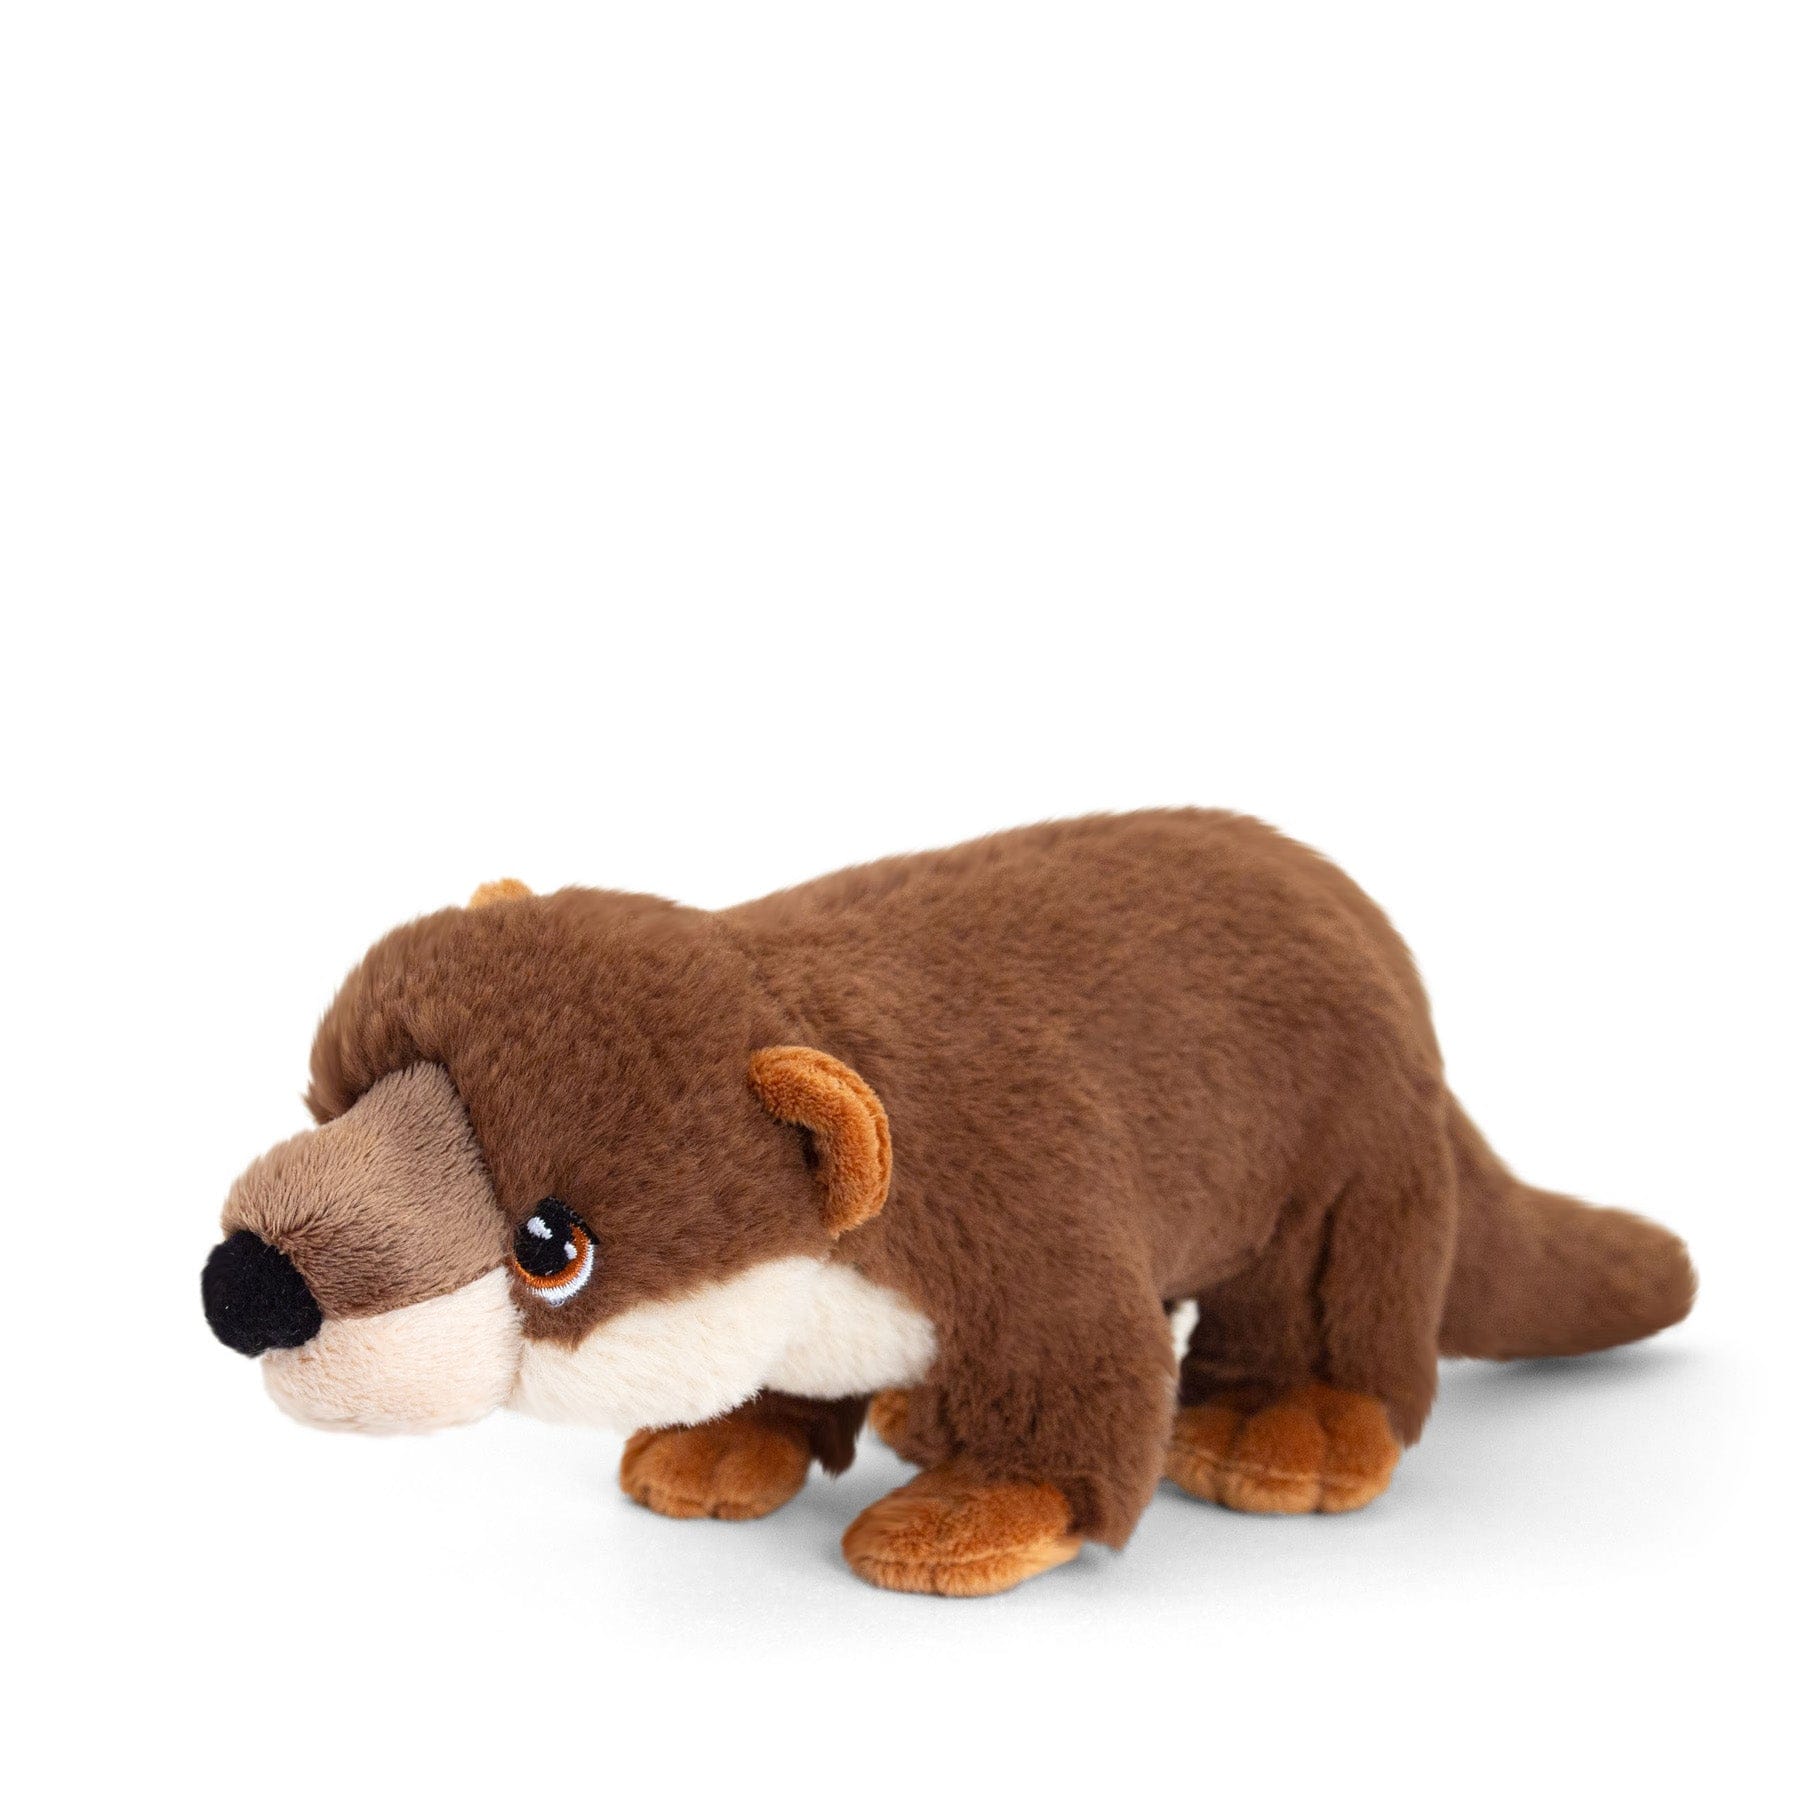 Brown plush otter toy with cute eyes on white background